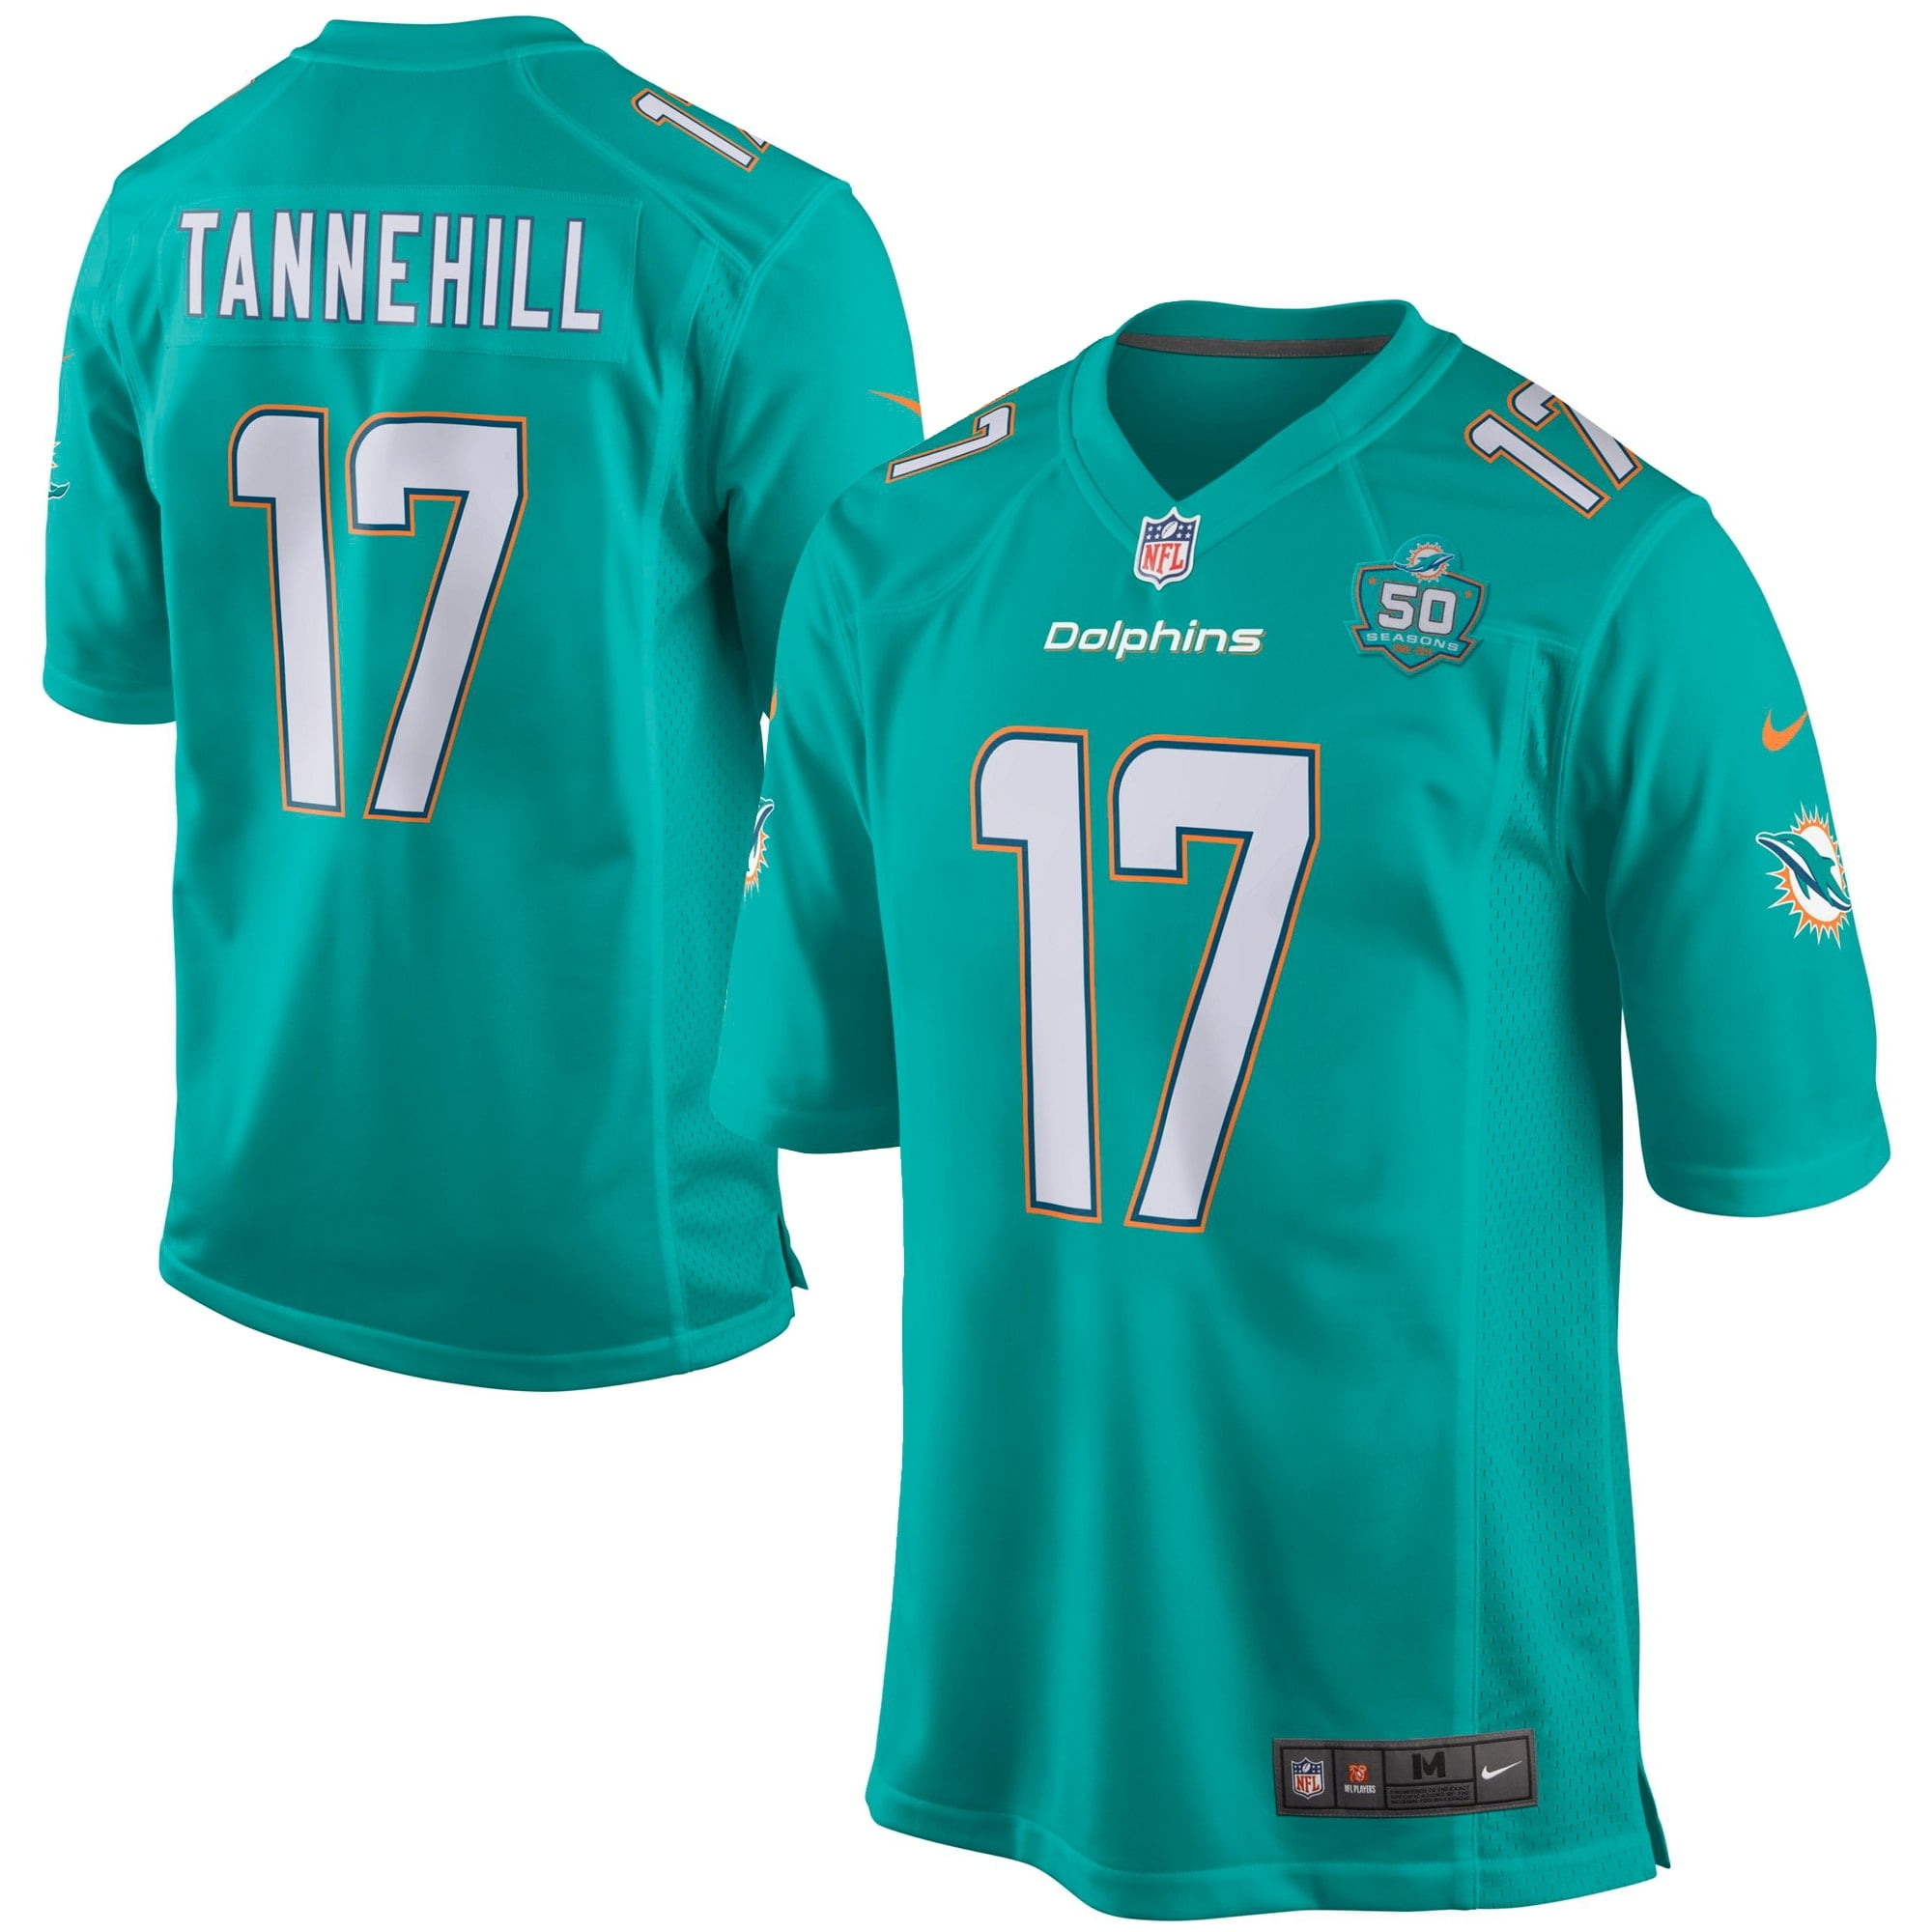 2015 miami dolphins jersey